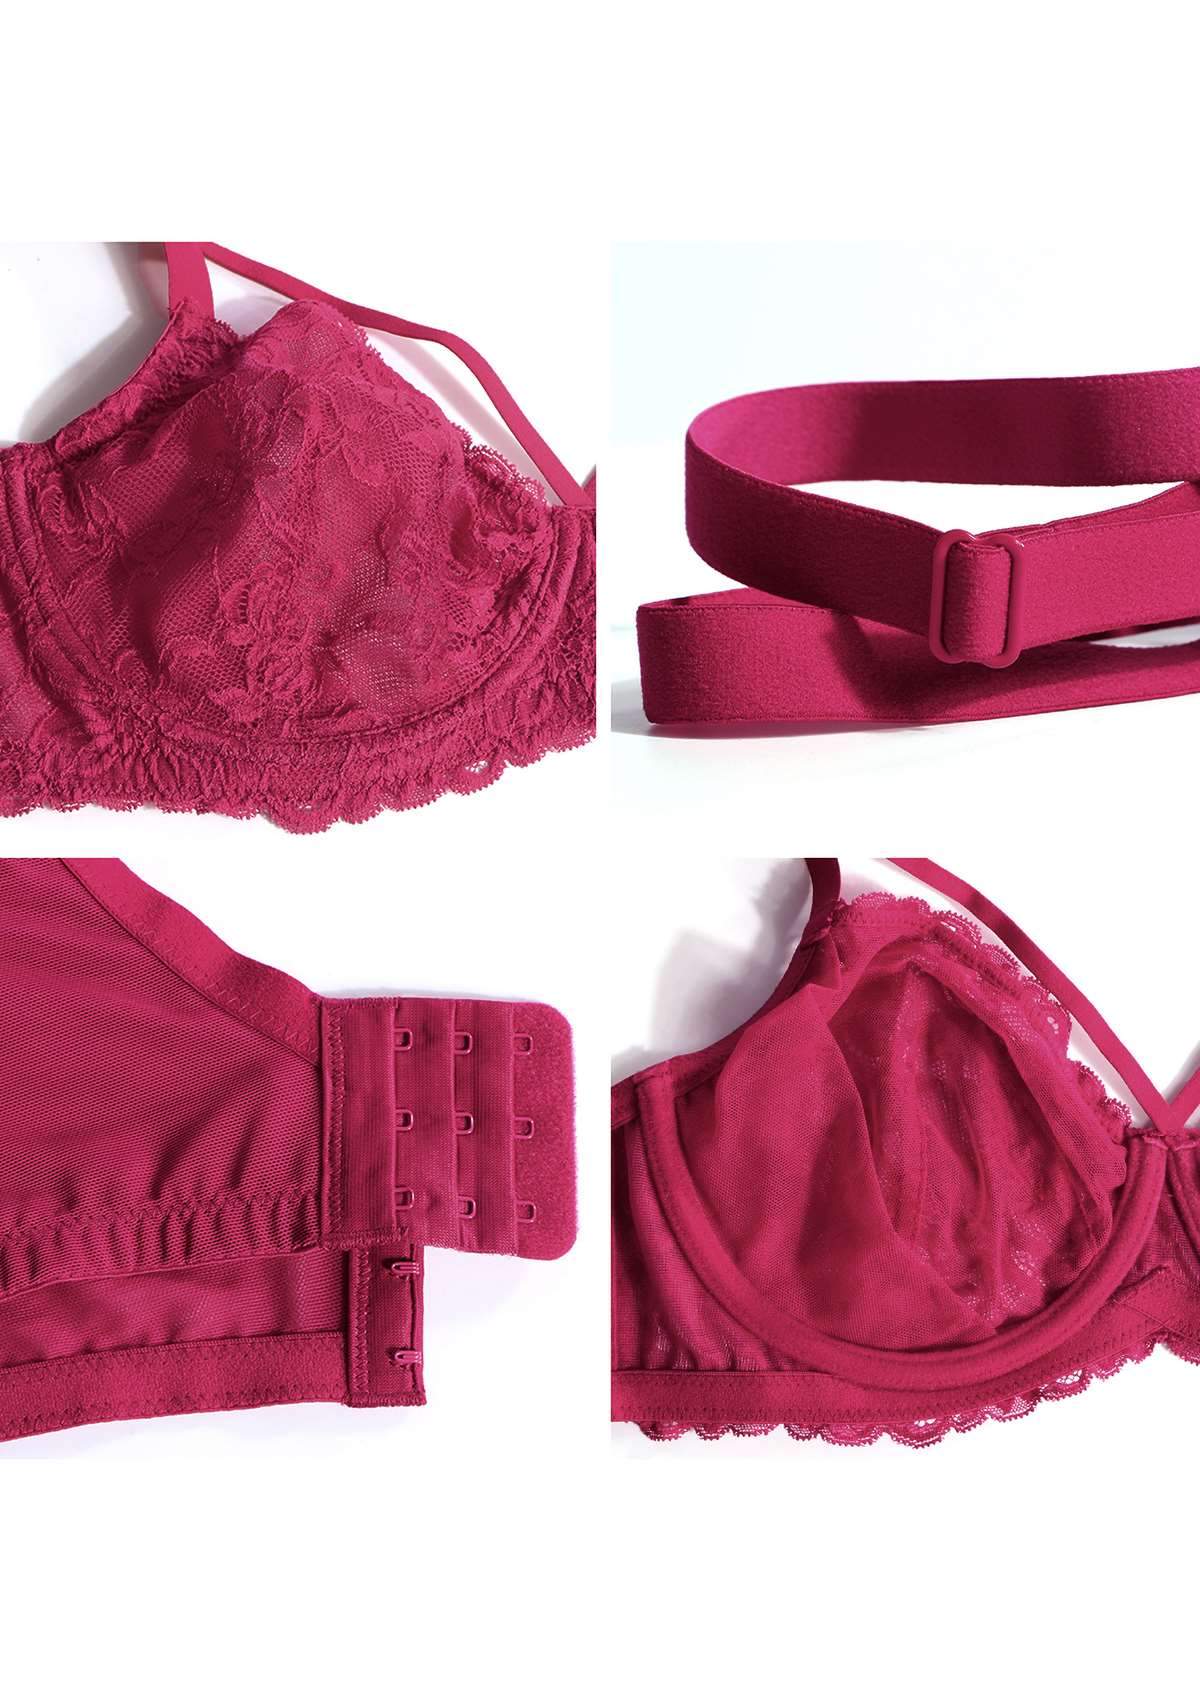 HSIA Pretty In Petals Sexy Lace Bra: Full Coverage Back Smoothing Bra - Copper Red / 40 / DDD/F